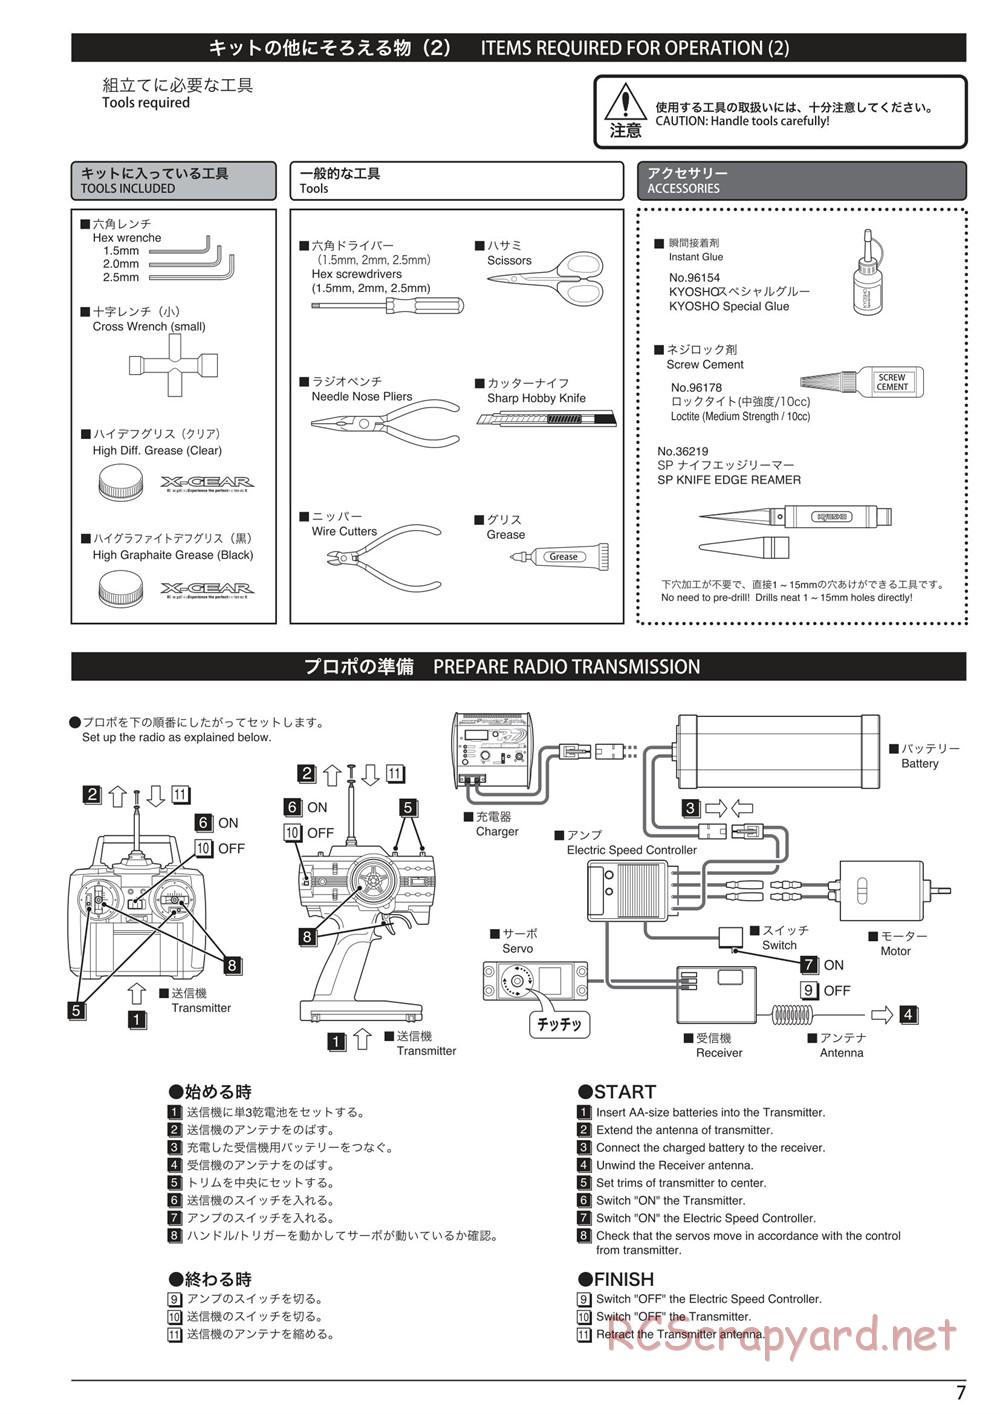 Kyosho - Ultima RB6 - Manual - Page 7